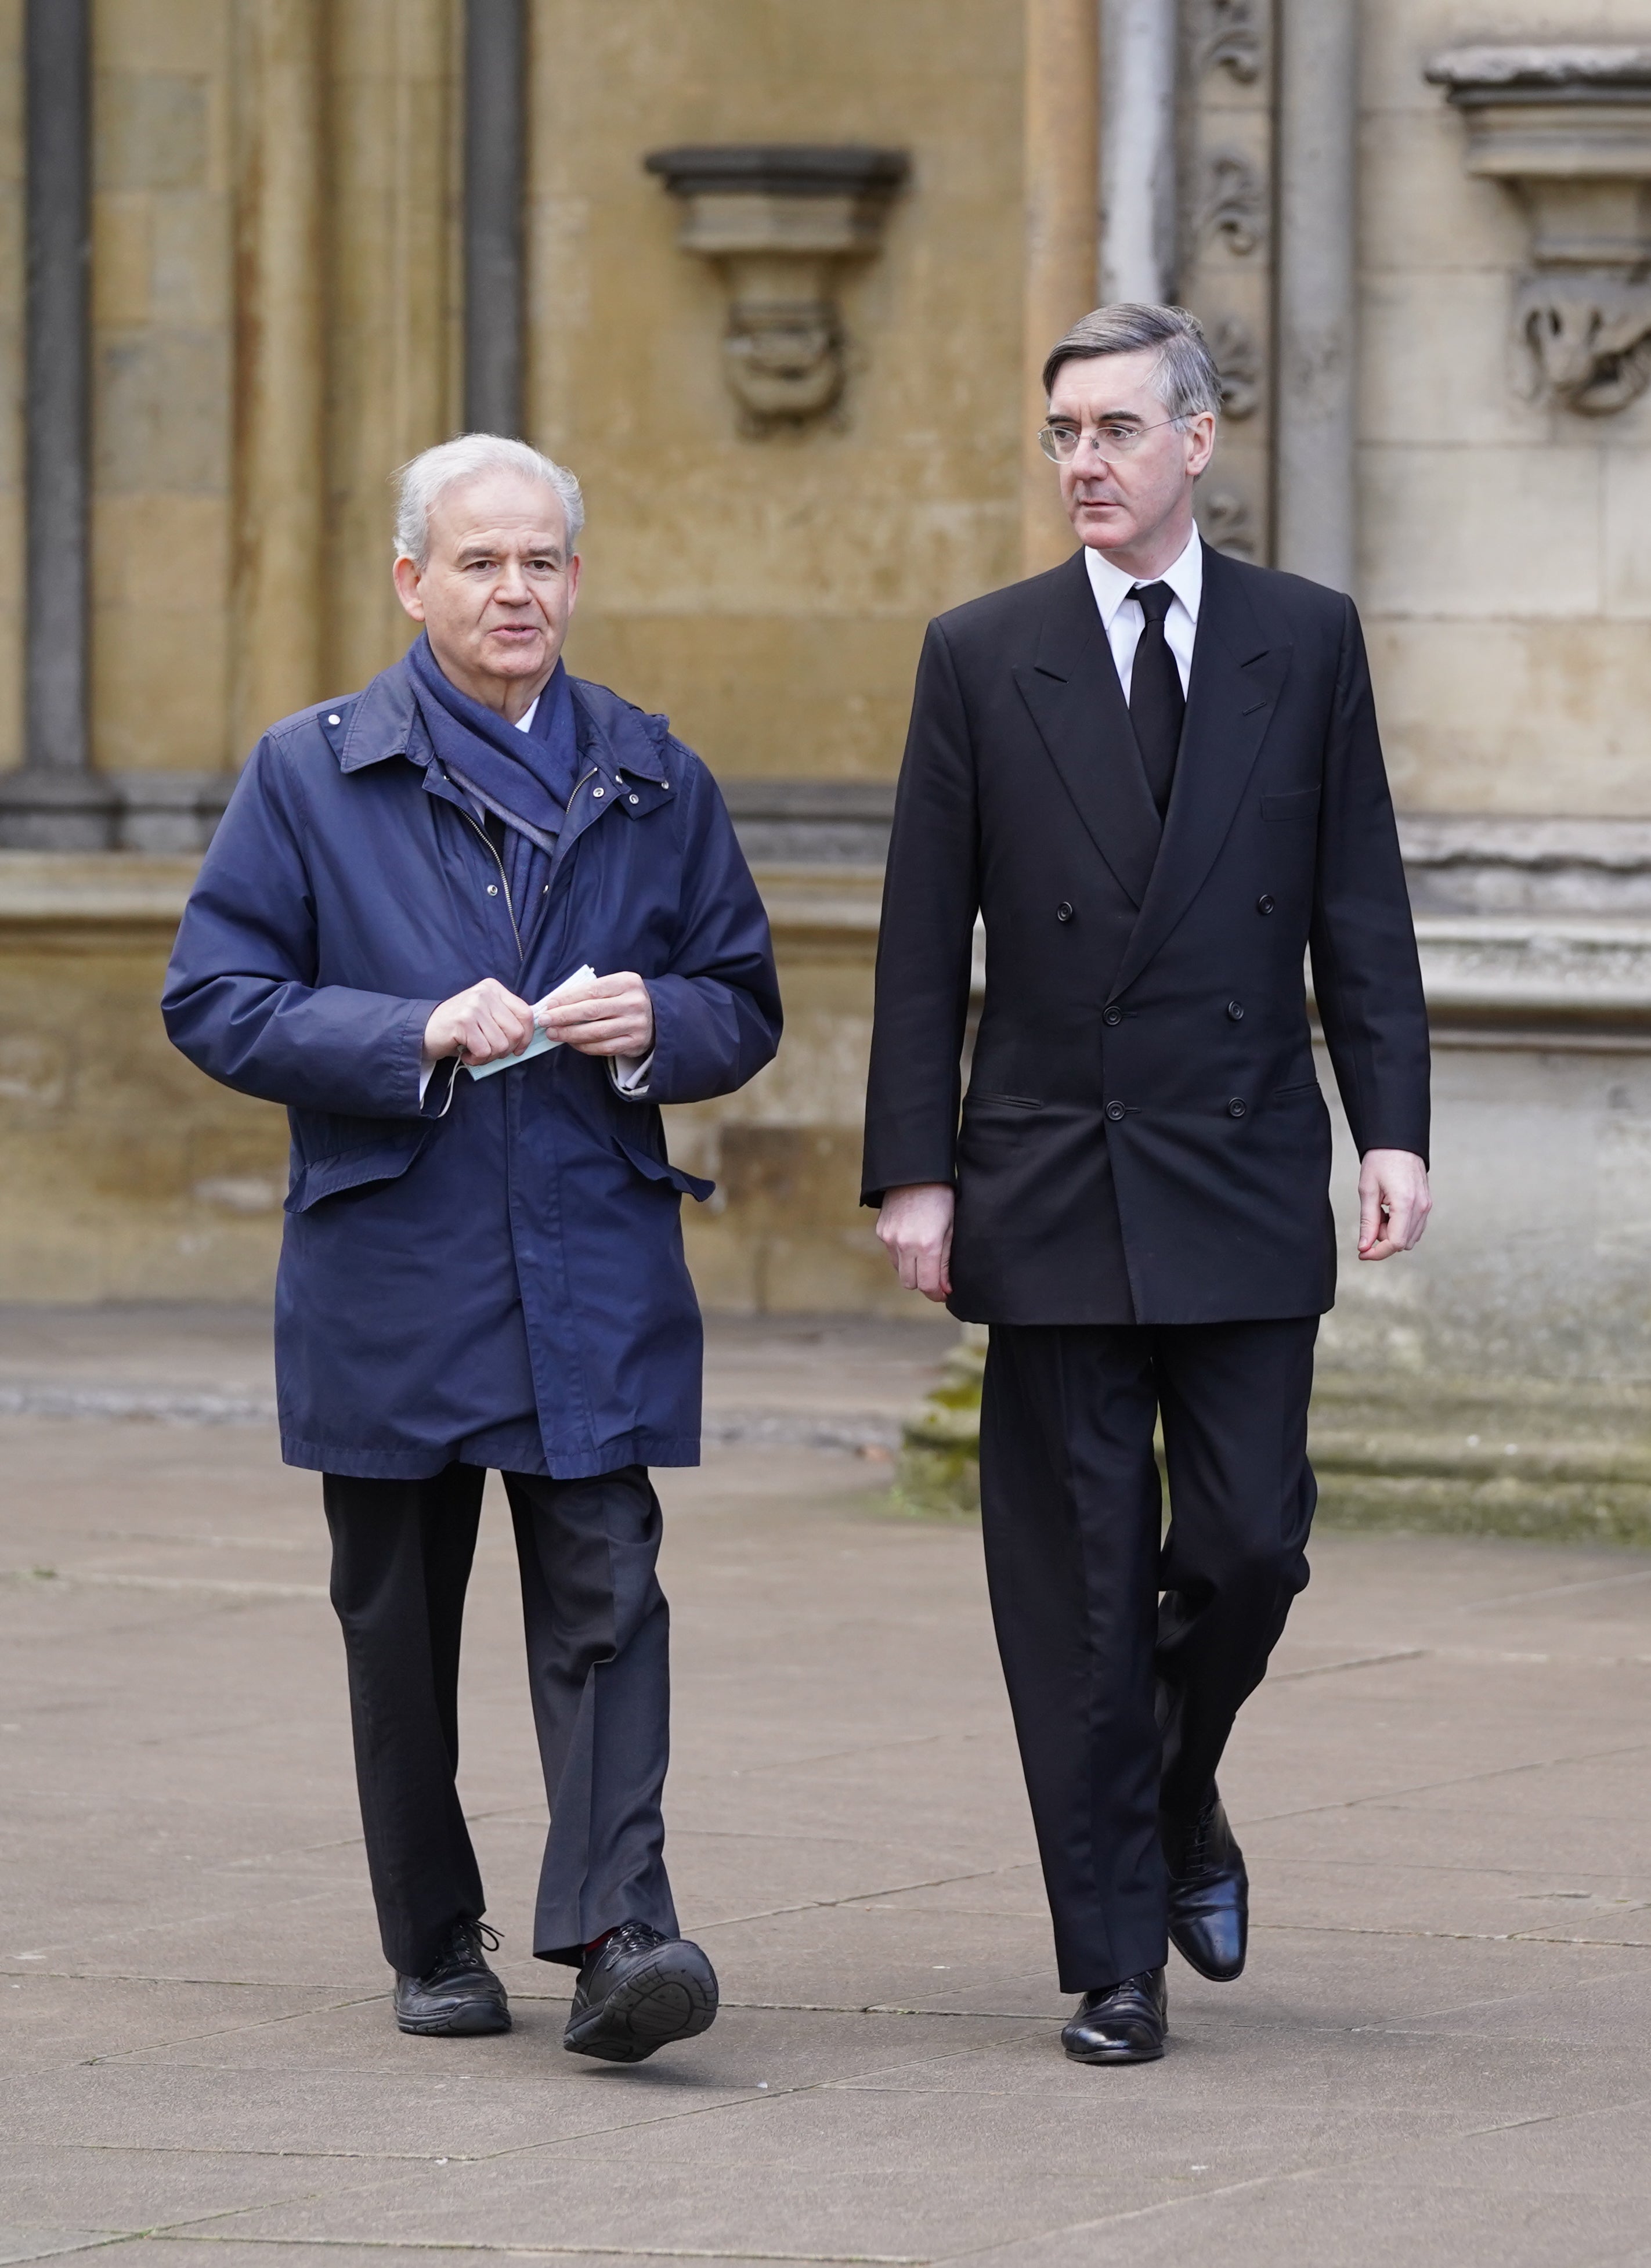 Leader of the House of Commons Jacob Rees-Mogg (right) arrives for the funeral (Stefan Rousseau/PA)